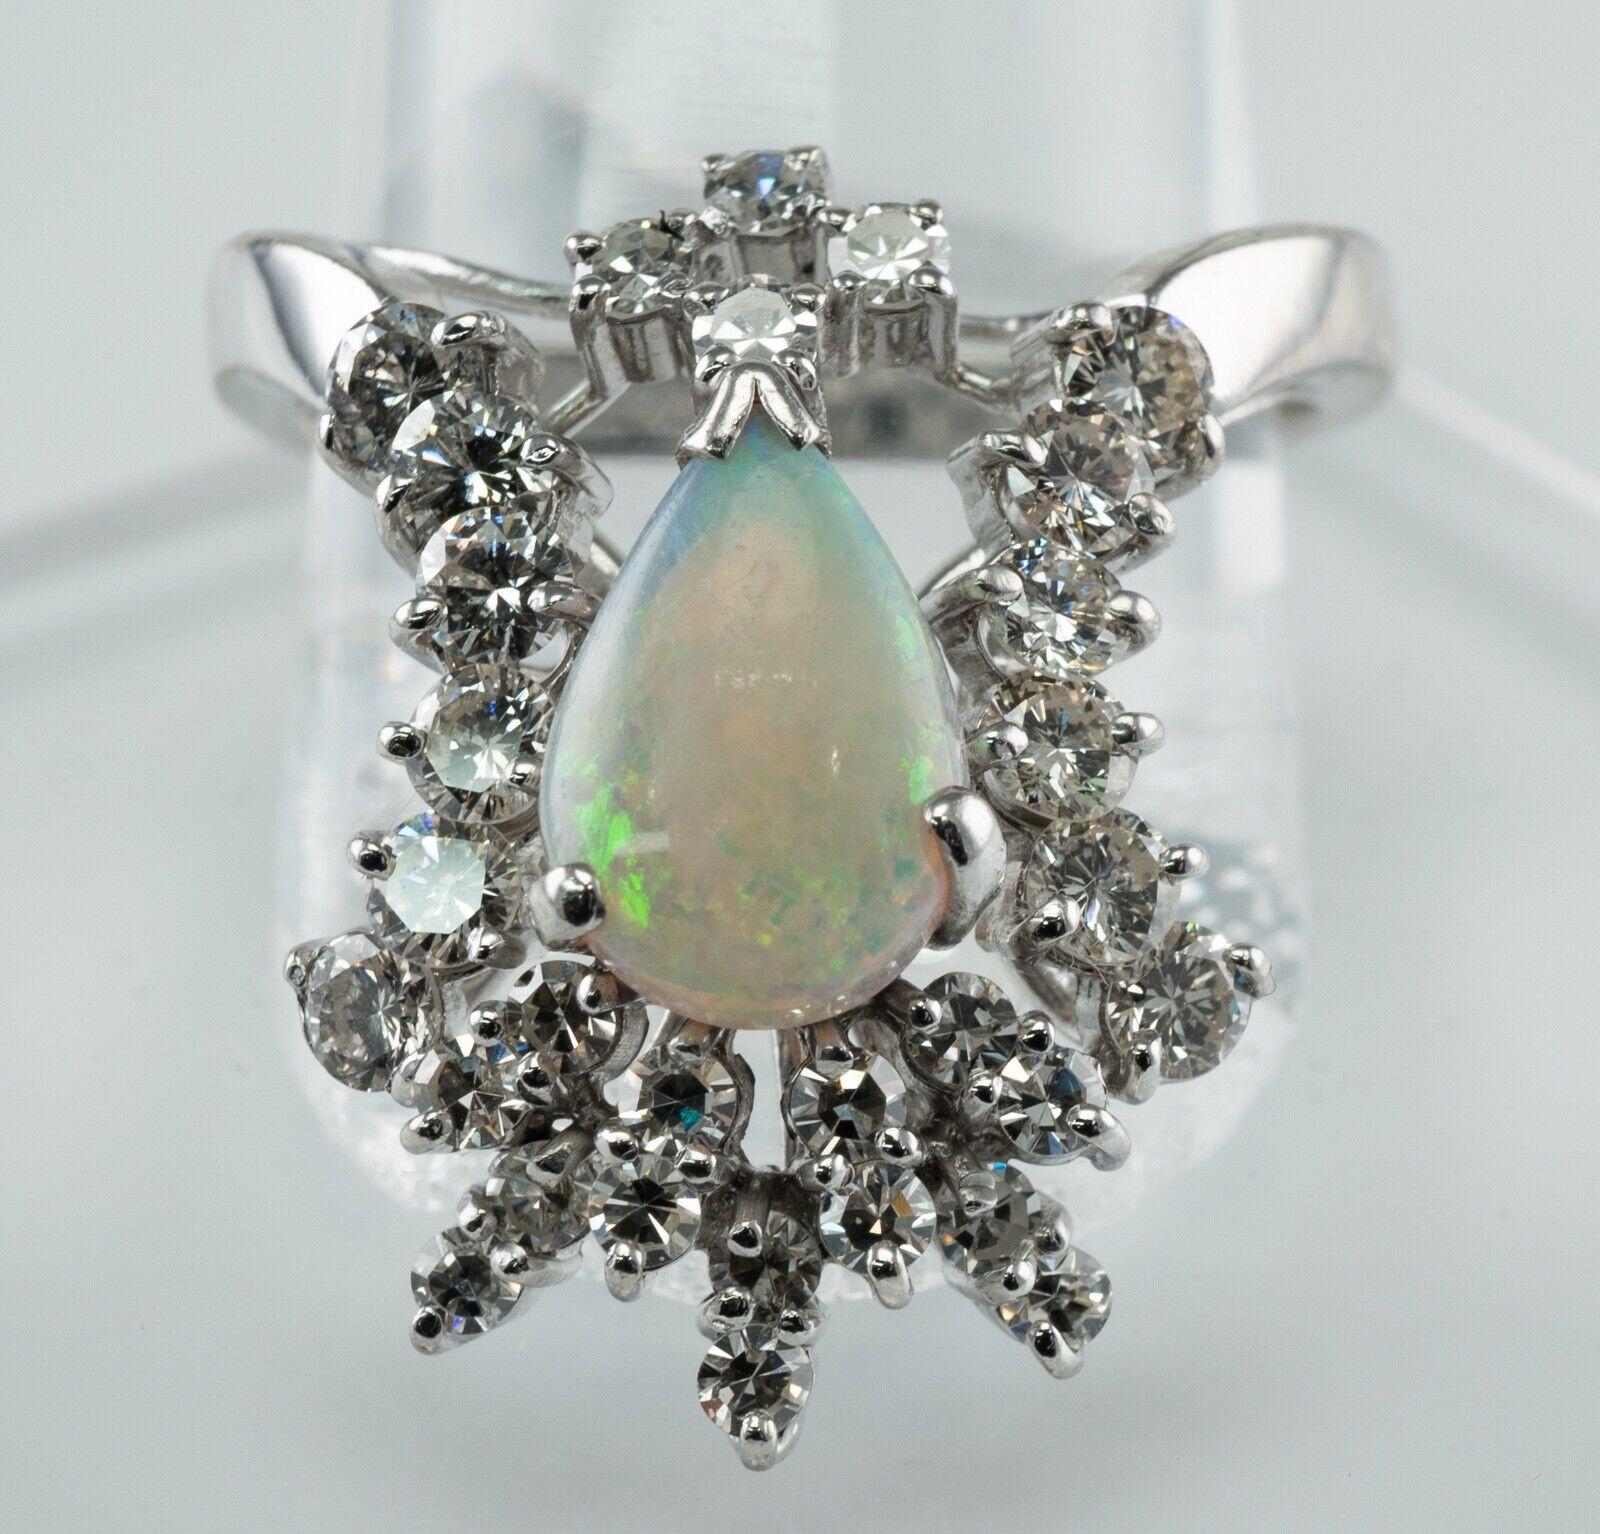 This estate ring is made in solid 14K White Gold and set with genuine Opal and diamonds.
The center Earth mined Pear Cut Opal measures 10mm x 7mm (1.03 carats). 
It has splashes of electric green, blue, orange colors! 
18 single cut diamonds (.72ct)